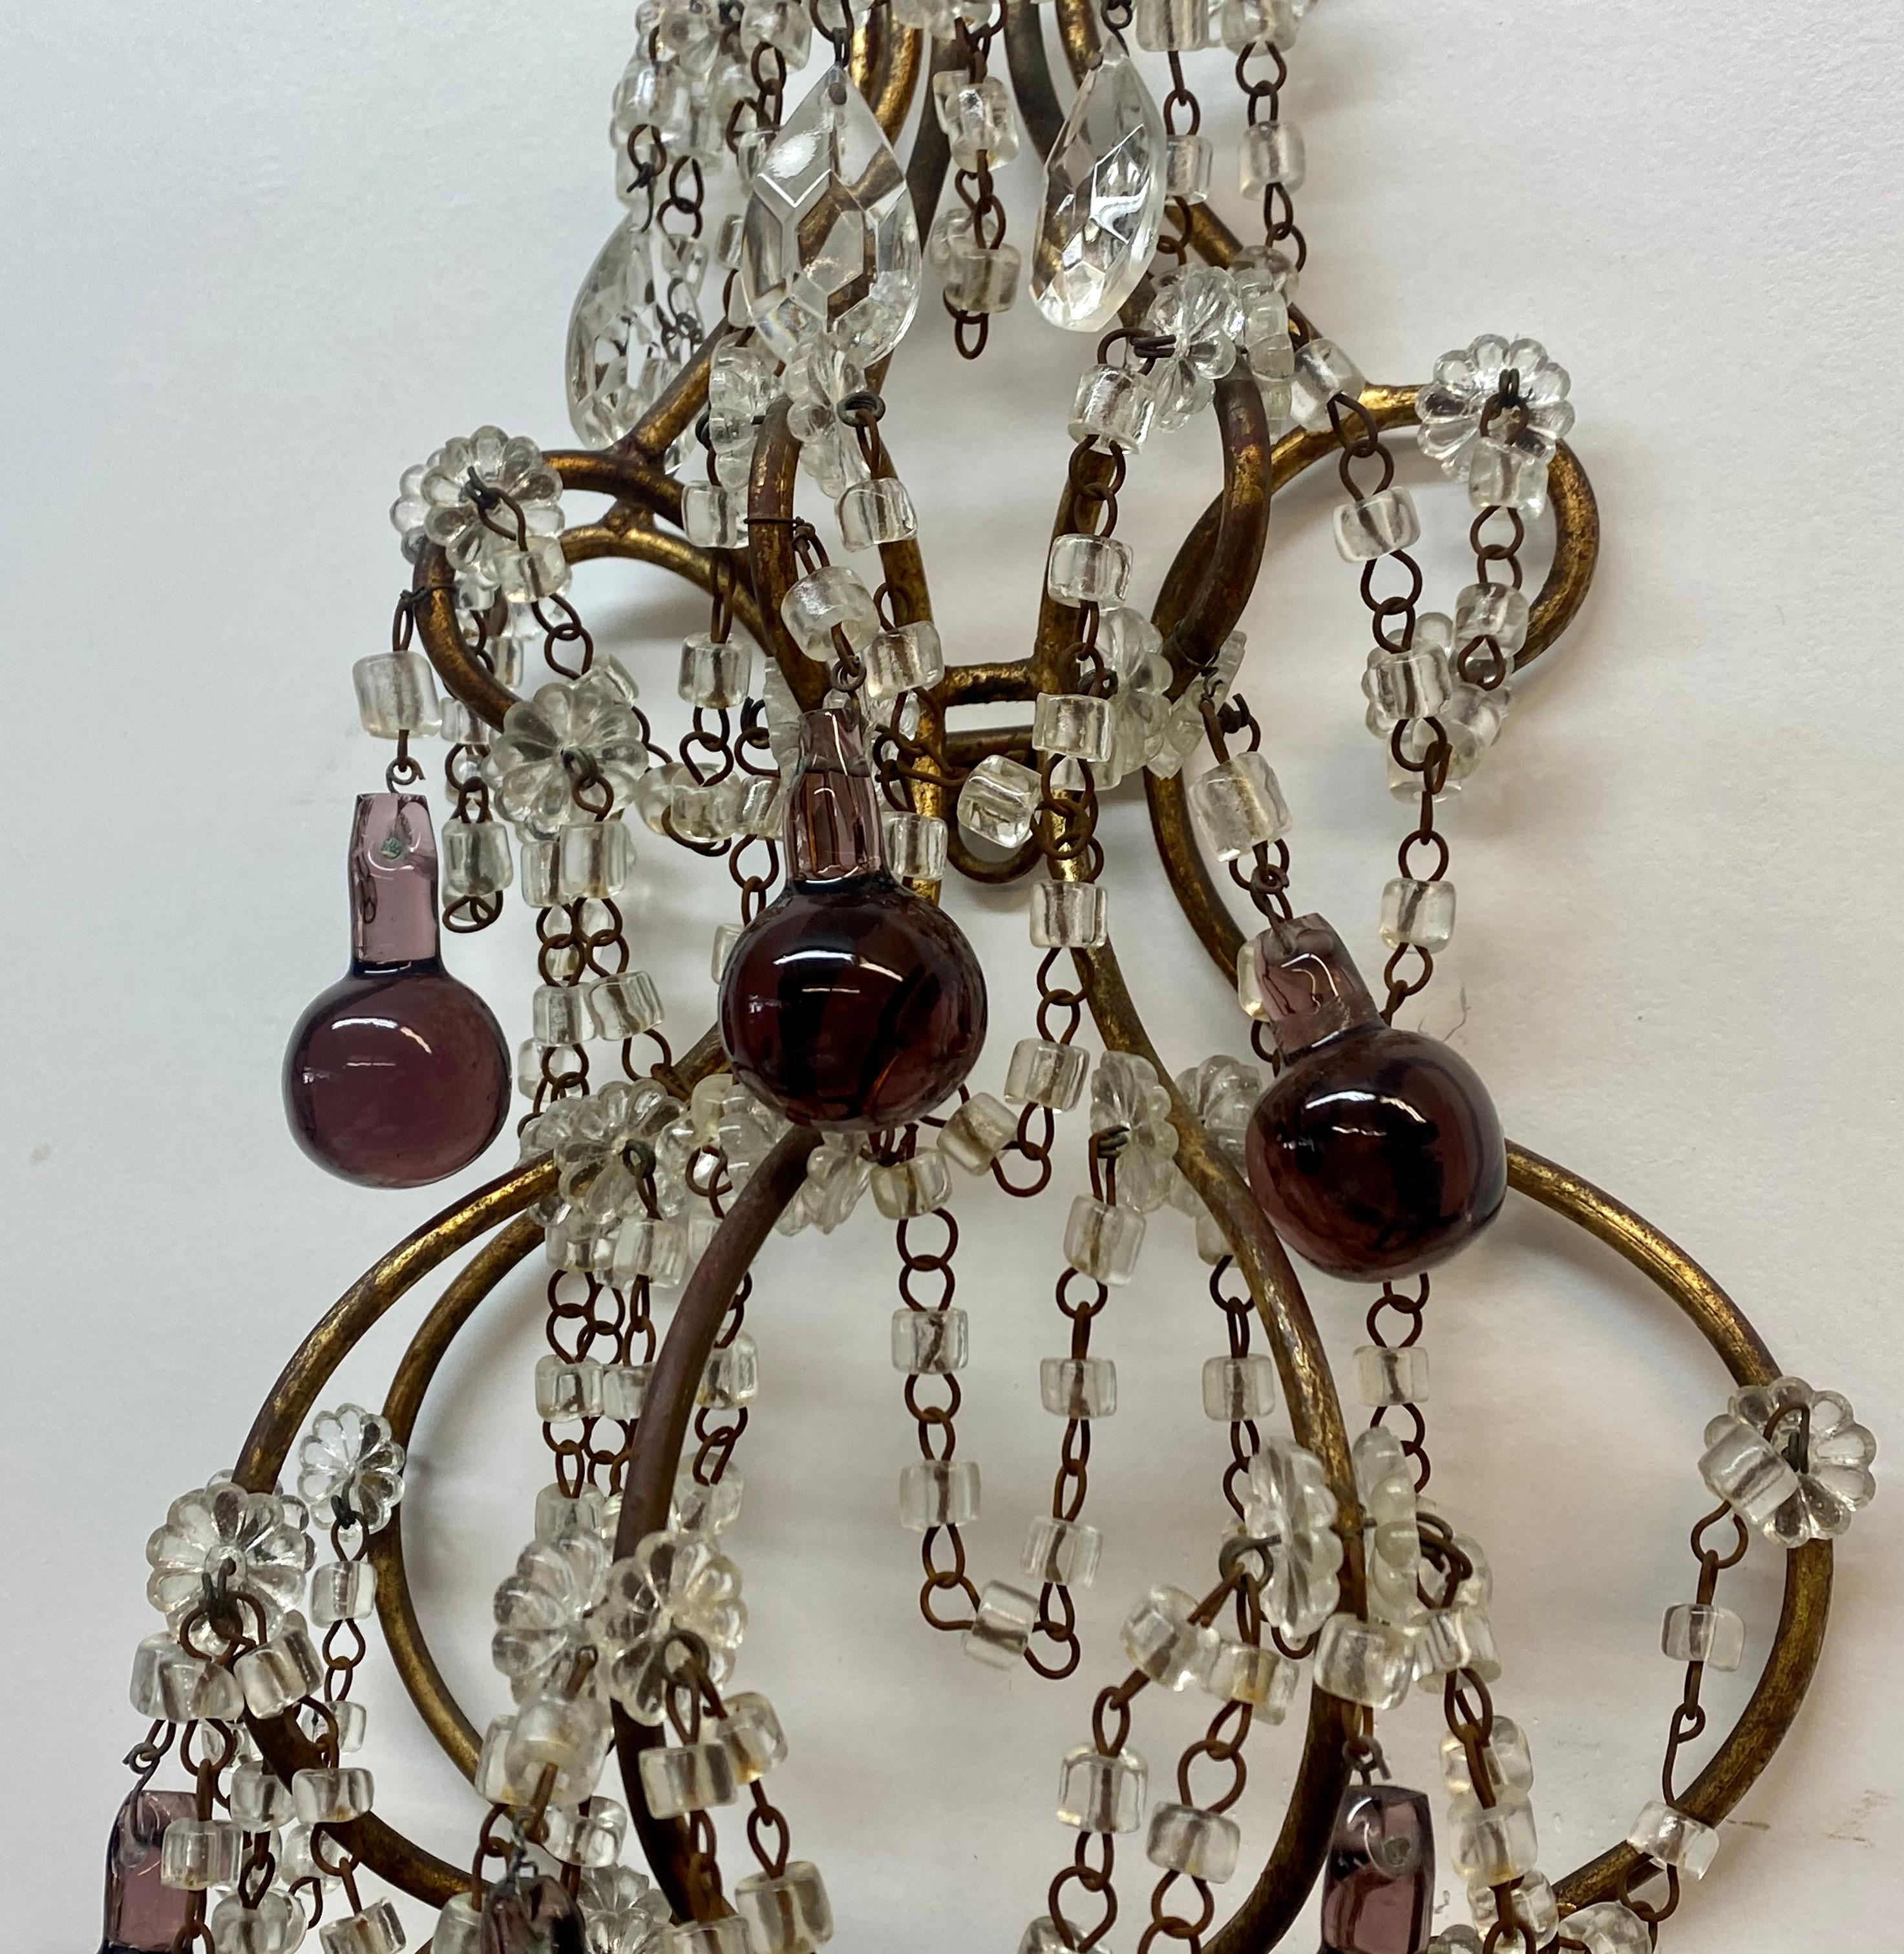 Vintage Wrought Iron, Crystal & Glass Wall Sconces, c.1930 For Sale 5